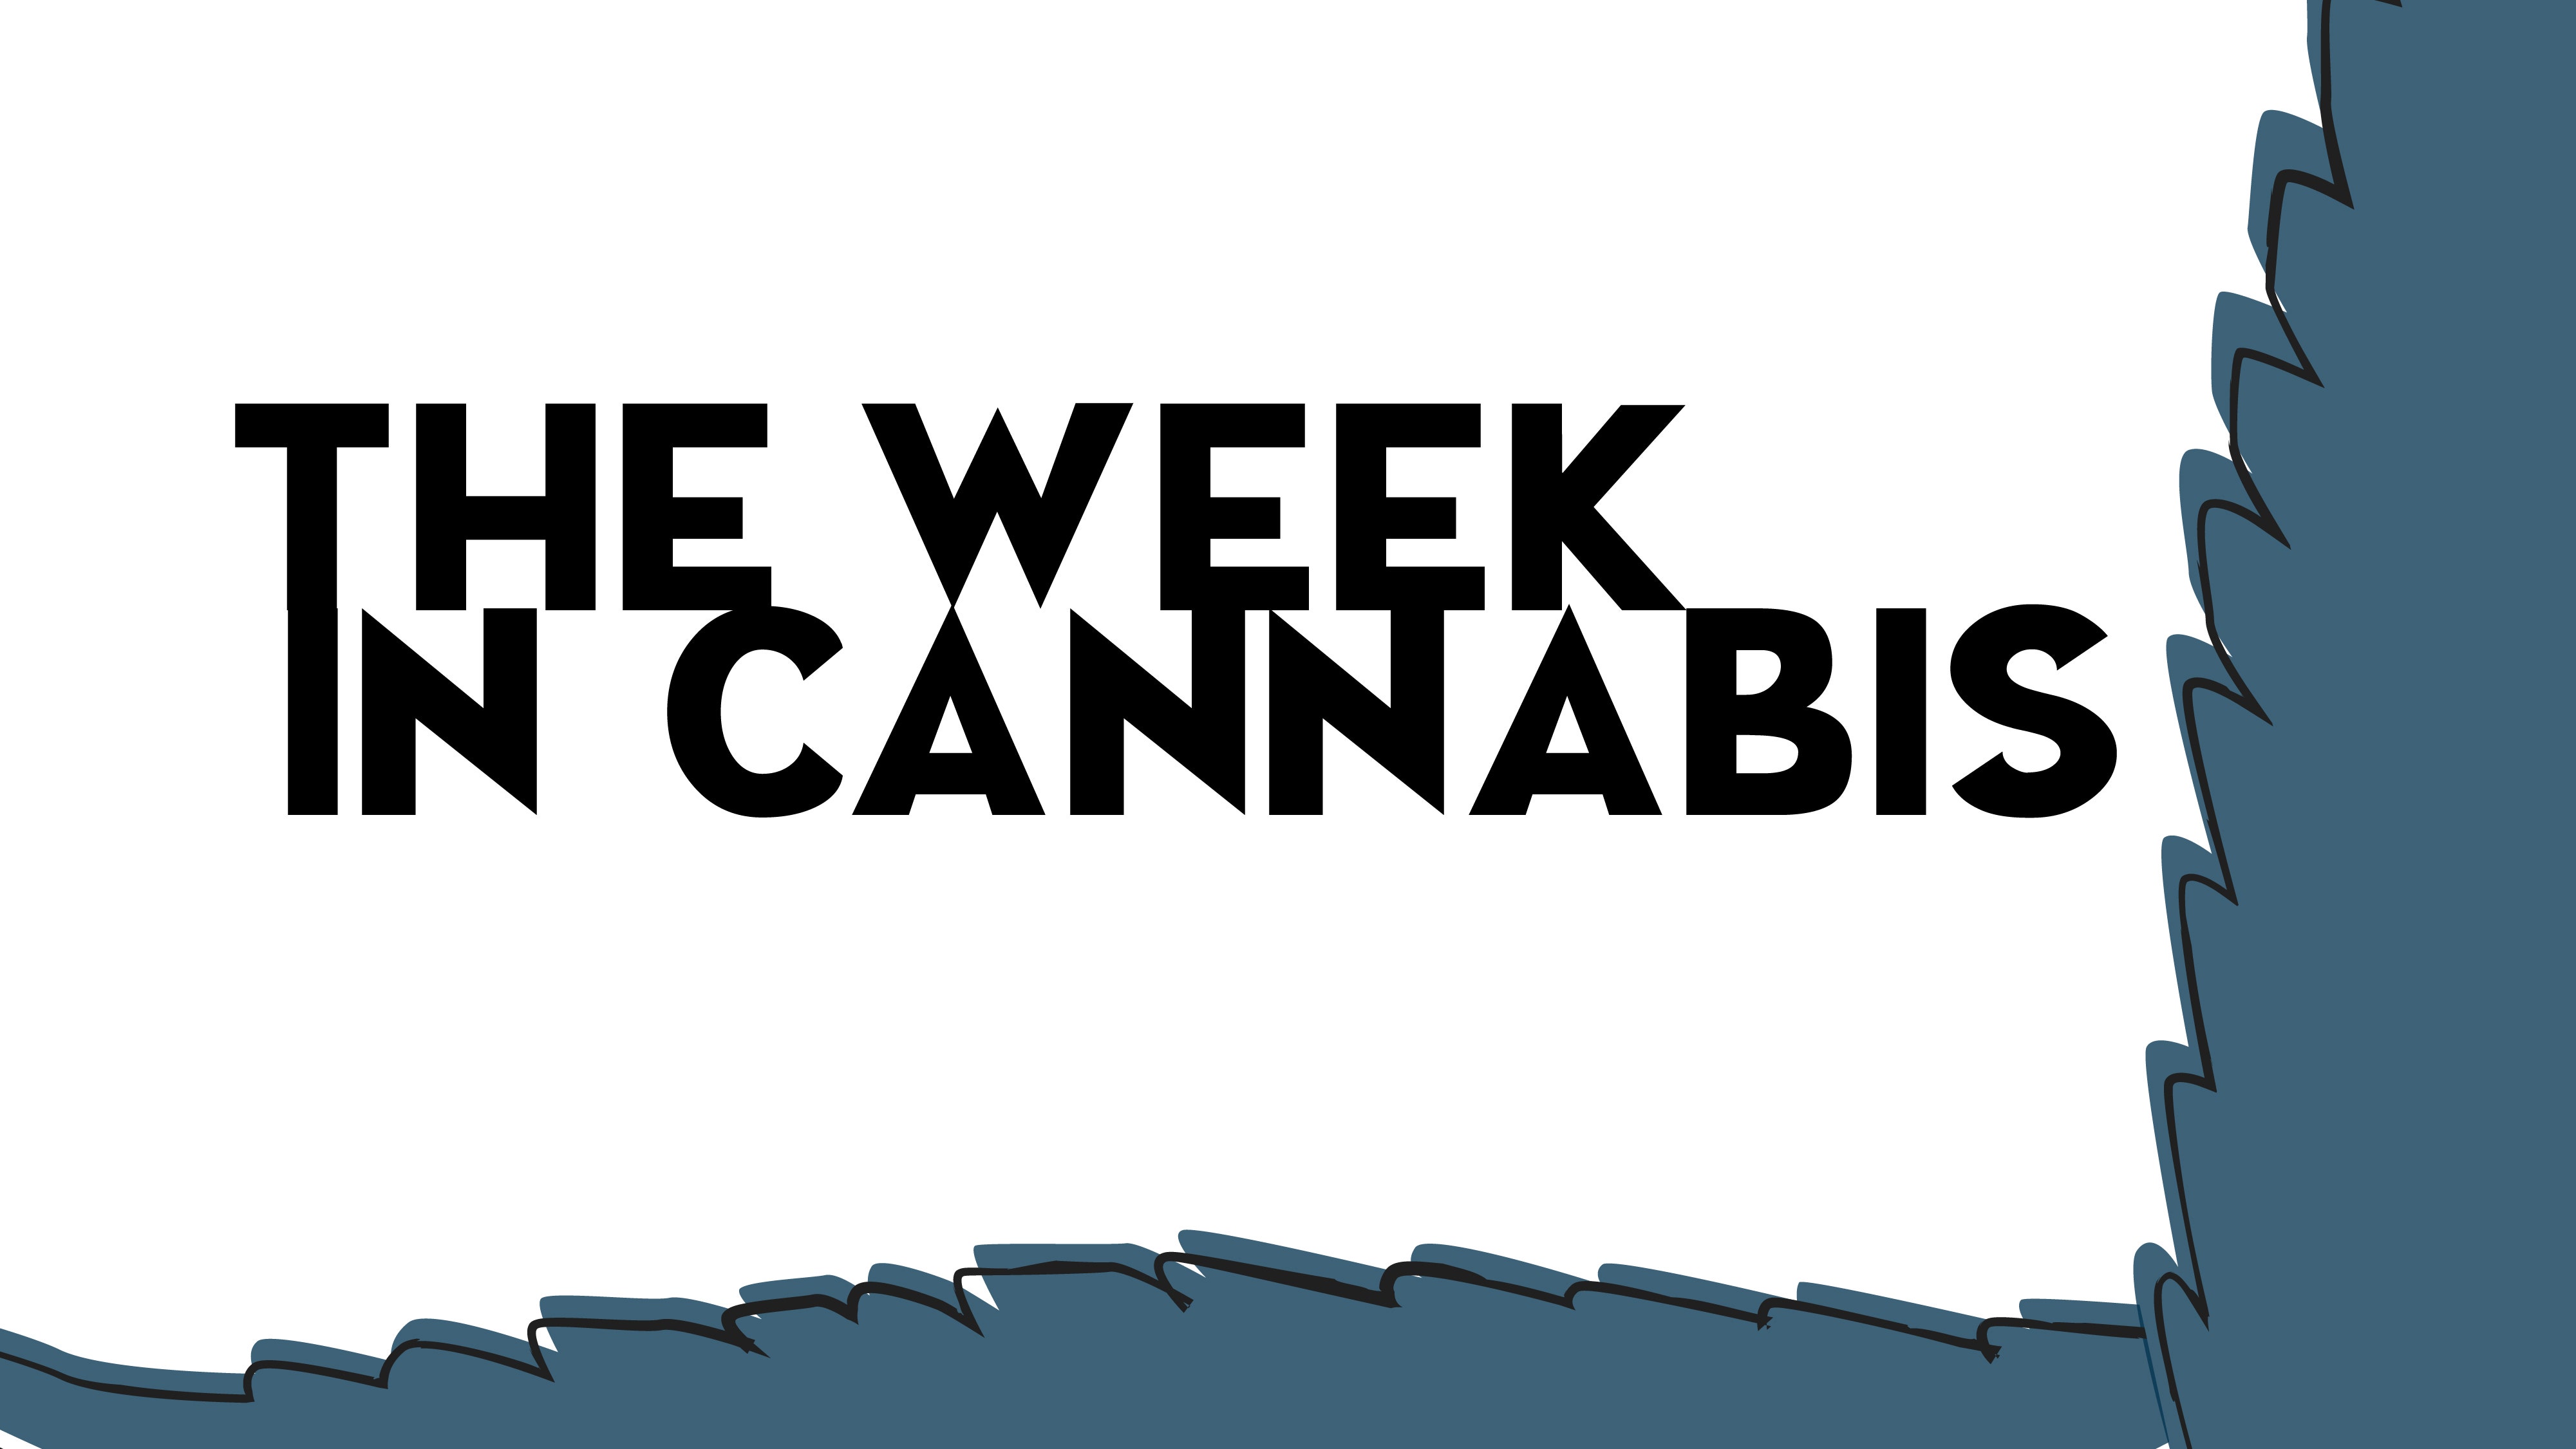 The Week In Cannabis: An Earnings Avalanche, Biden's Clemency Plans, Cuomo's Resignation And More